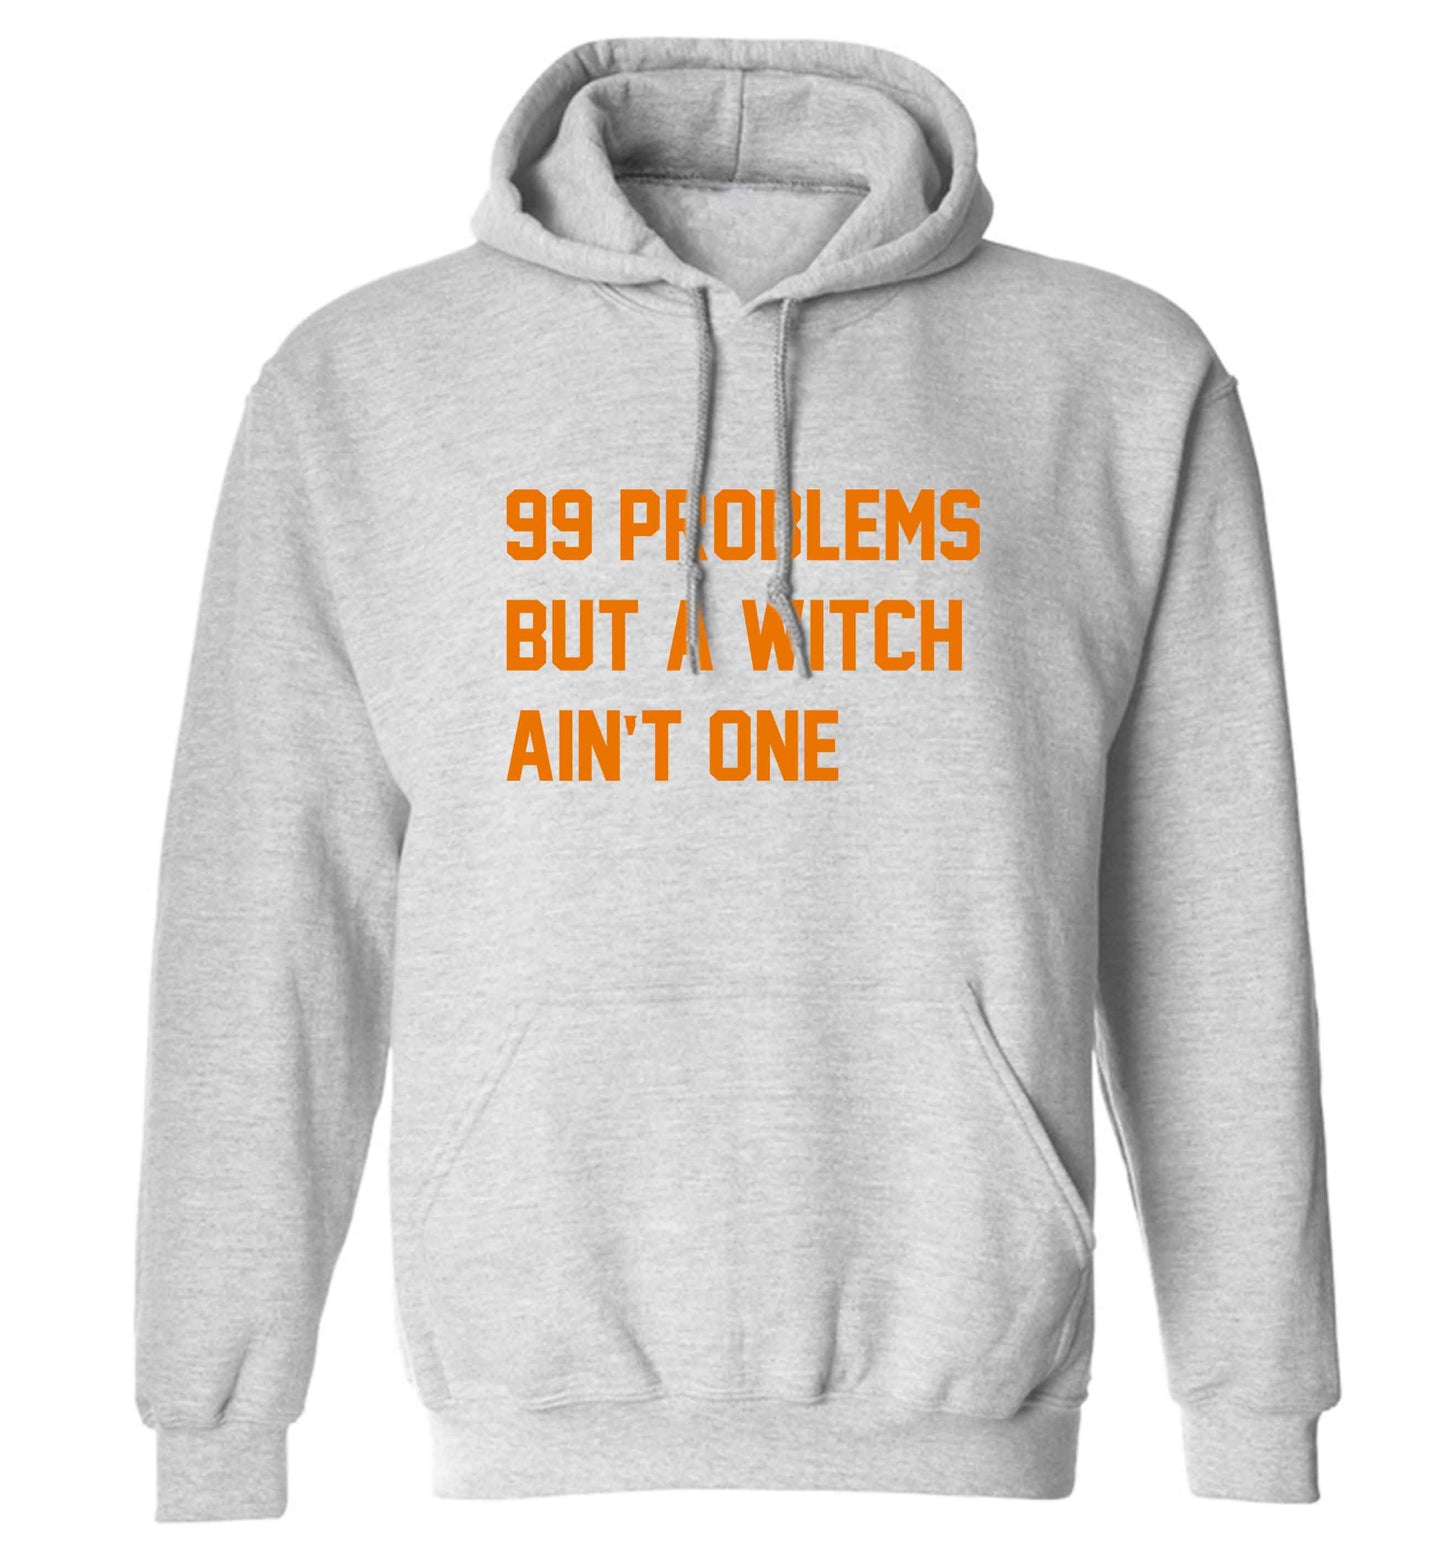 99 Problems but a witch aint one adults unisex grey hoodie 2XL